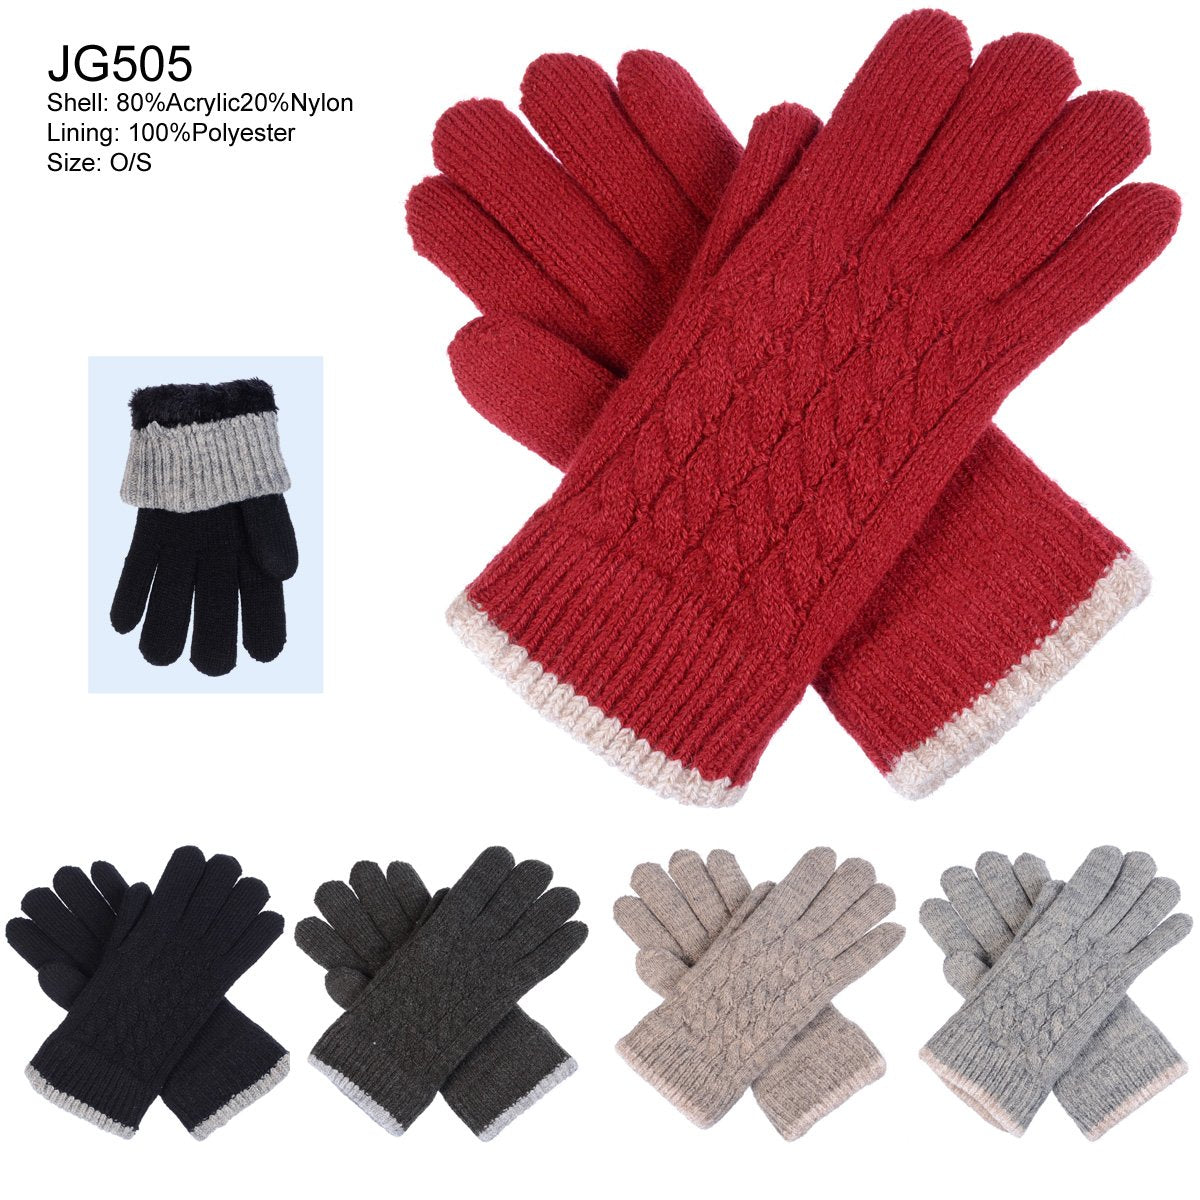 Two-Tone Knitted Gloves W/ Chenille Lining - 12Pc Set